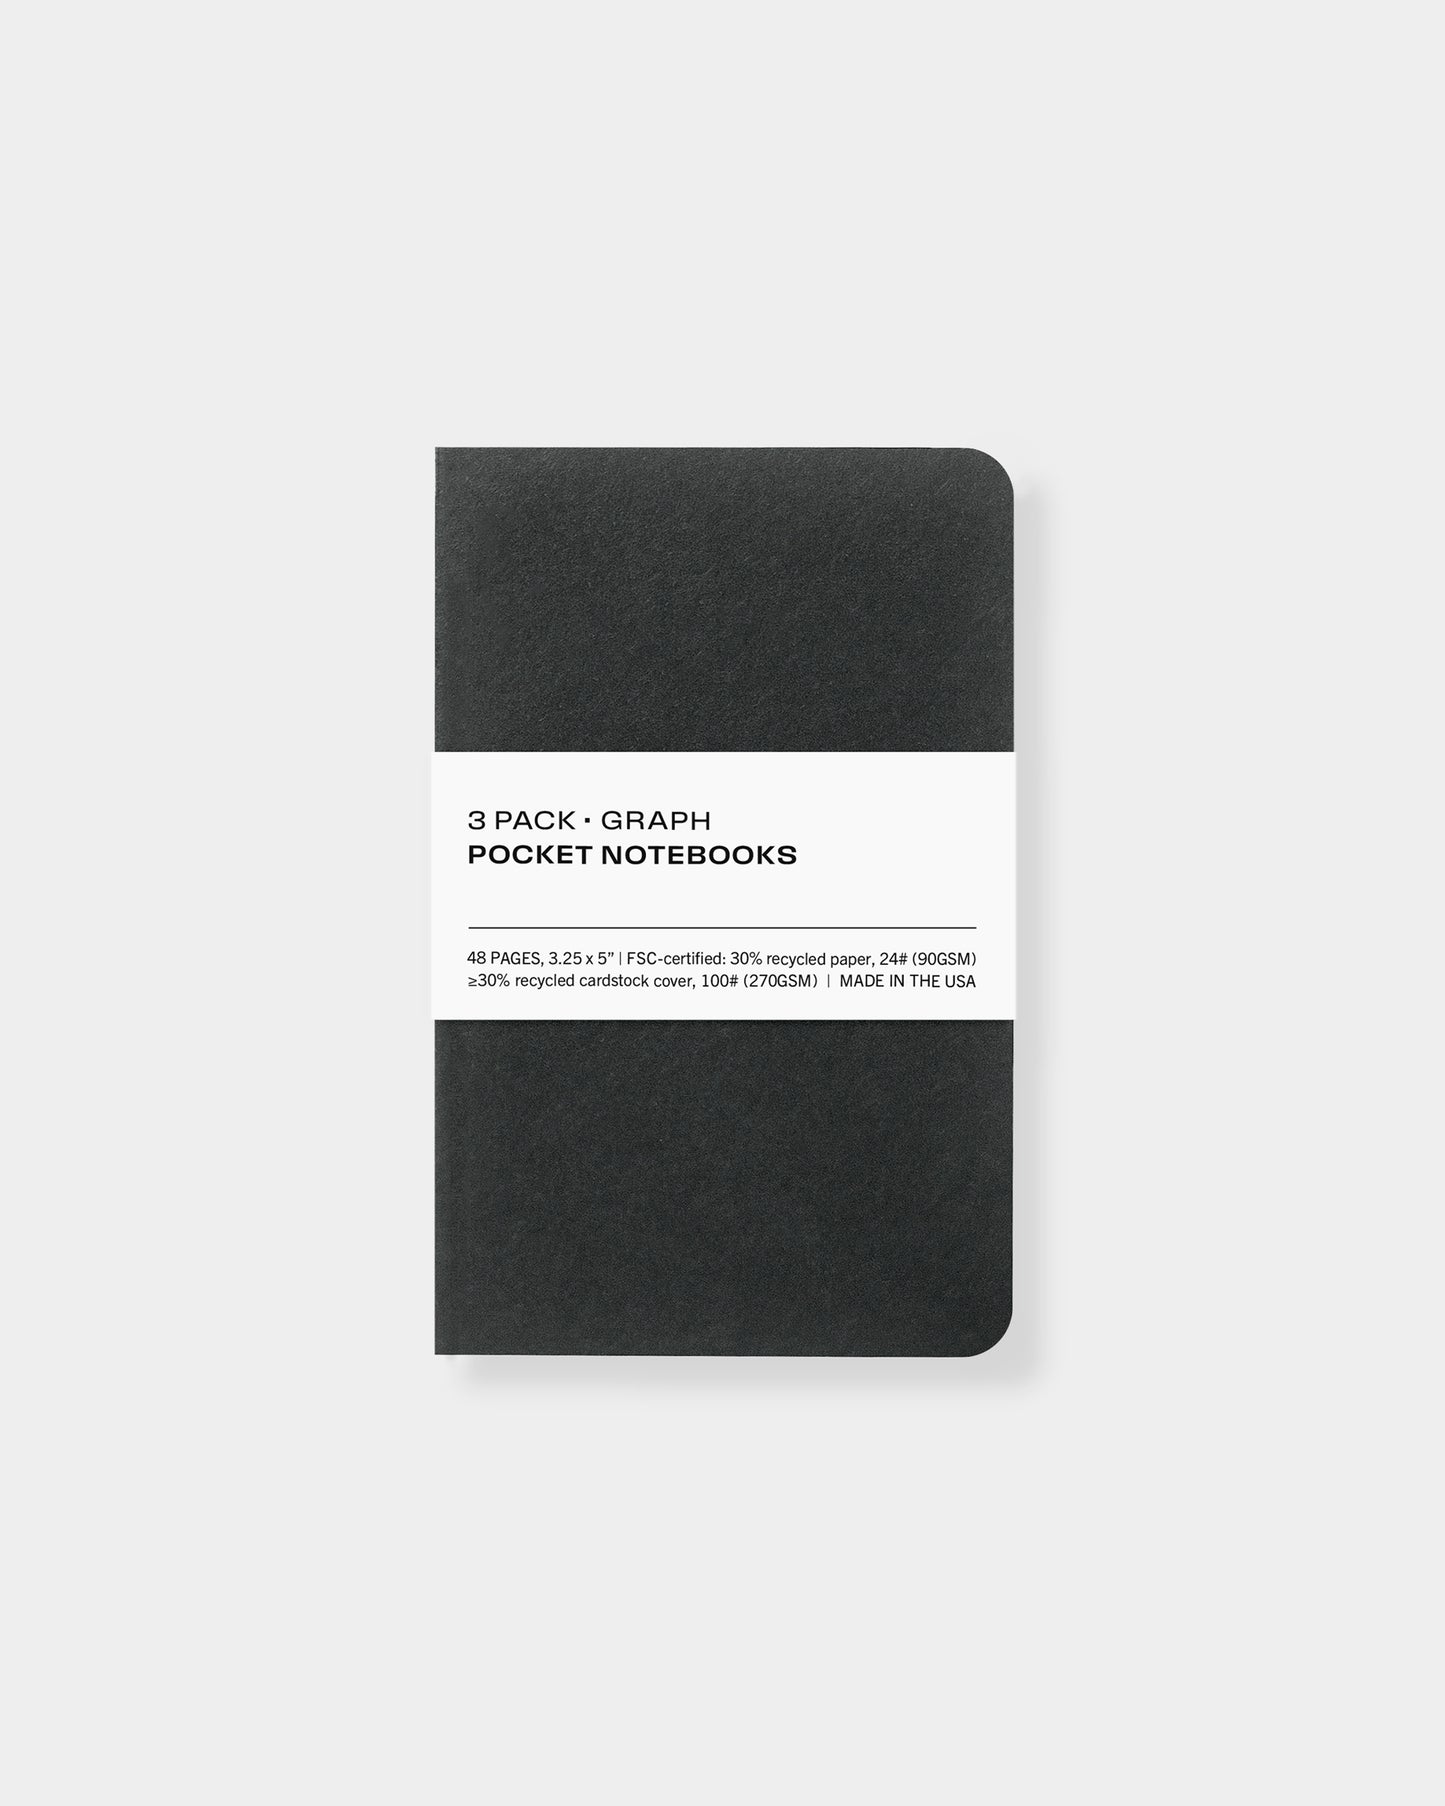 3 pack pocket notebooks, 3.25 x 5", made with eco-friendly papers. Graph paper pages, black color way.